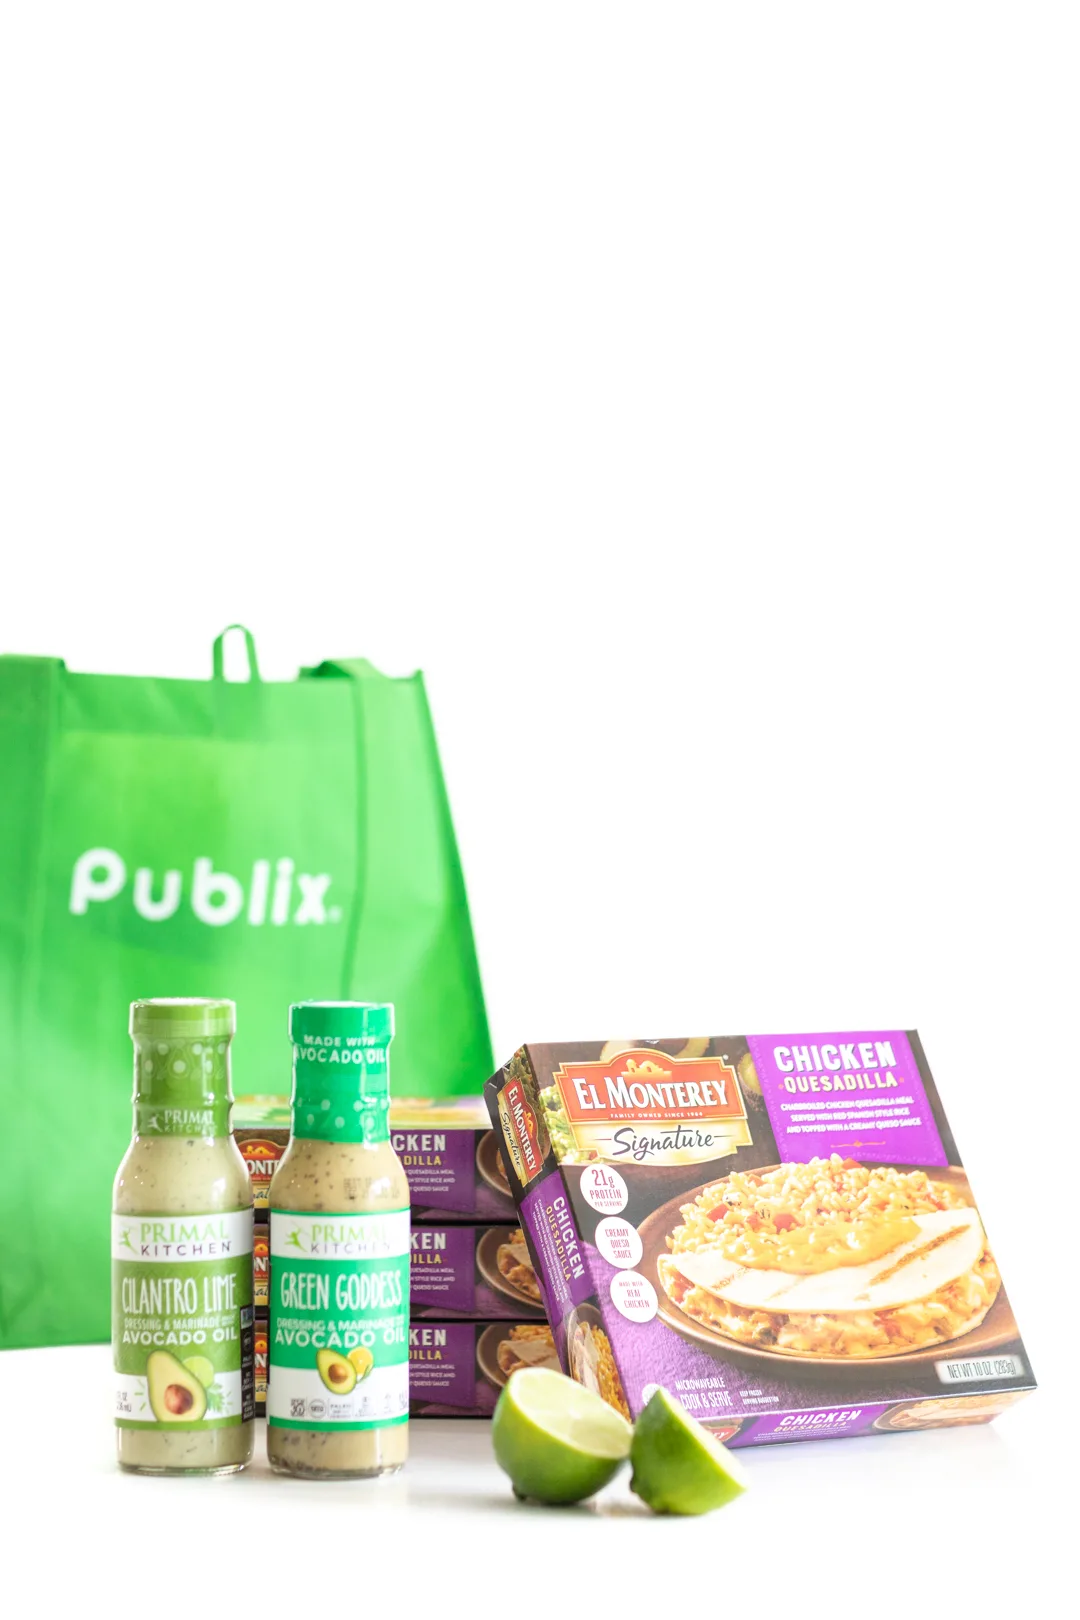 publix reusable shopping bag, Primal Kitchen salad dressings lime and cilantro and green goddess. El Monterey chicken quesadilla meals.